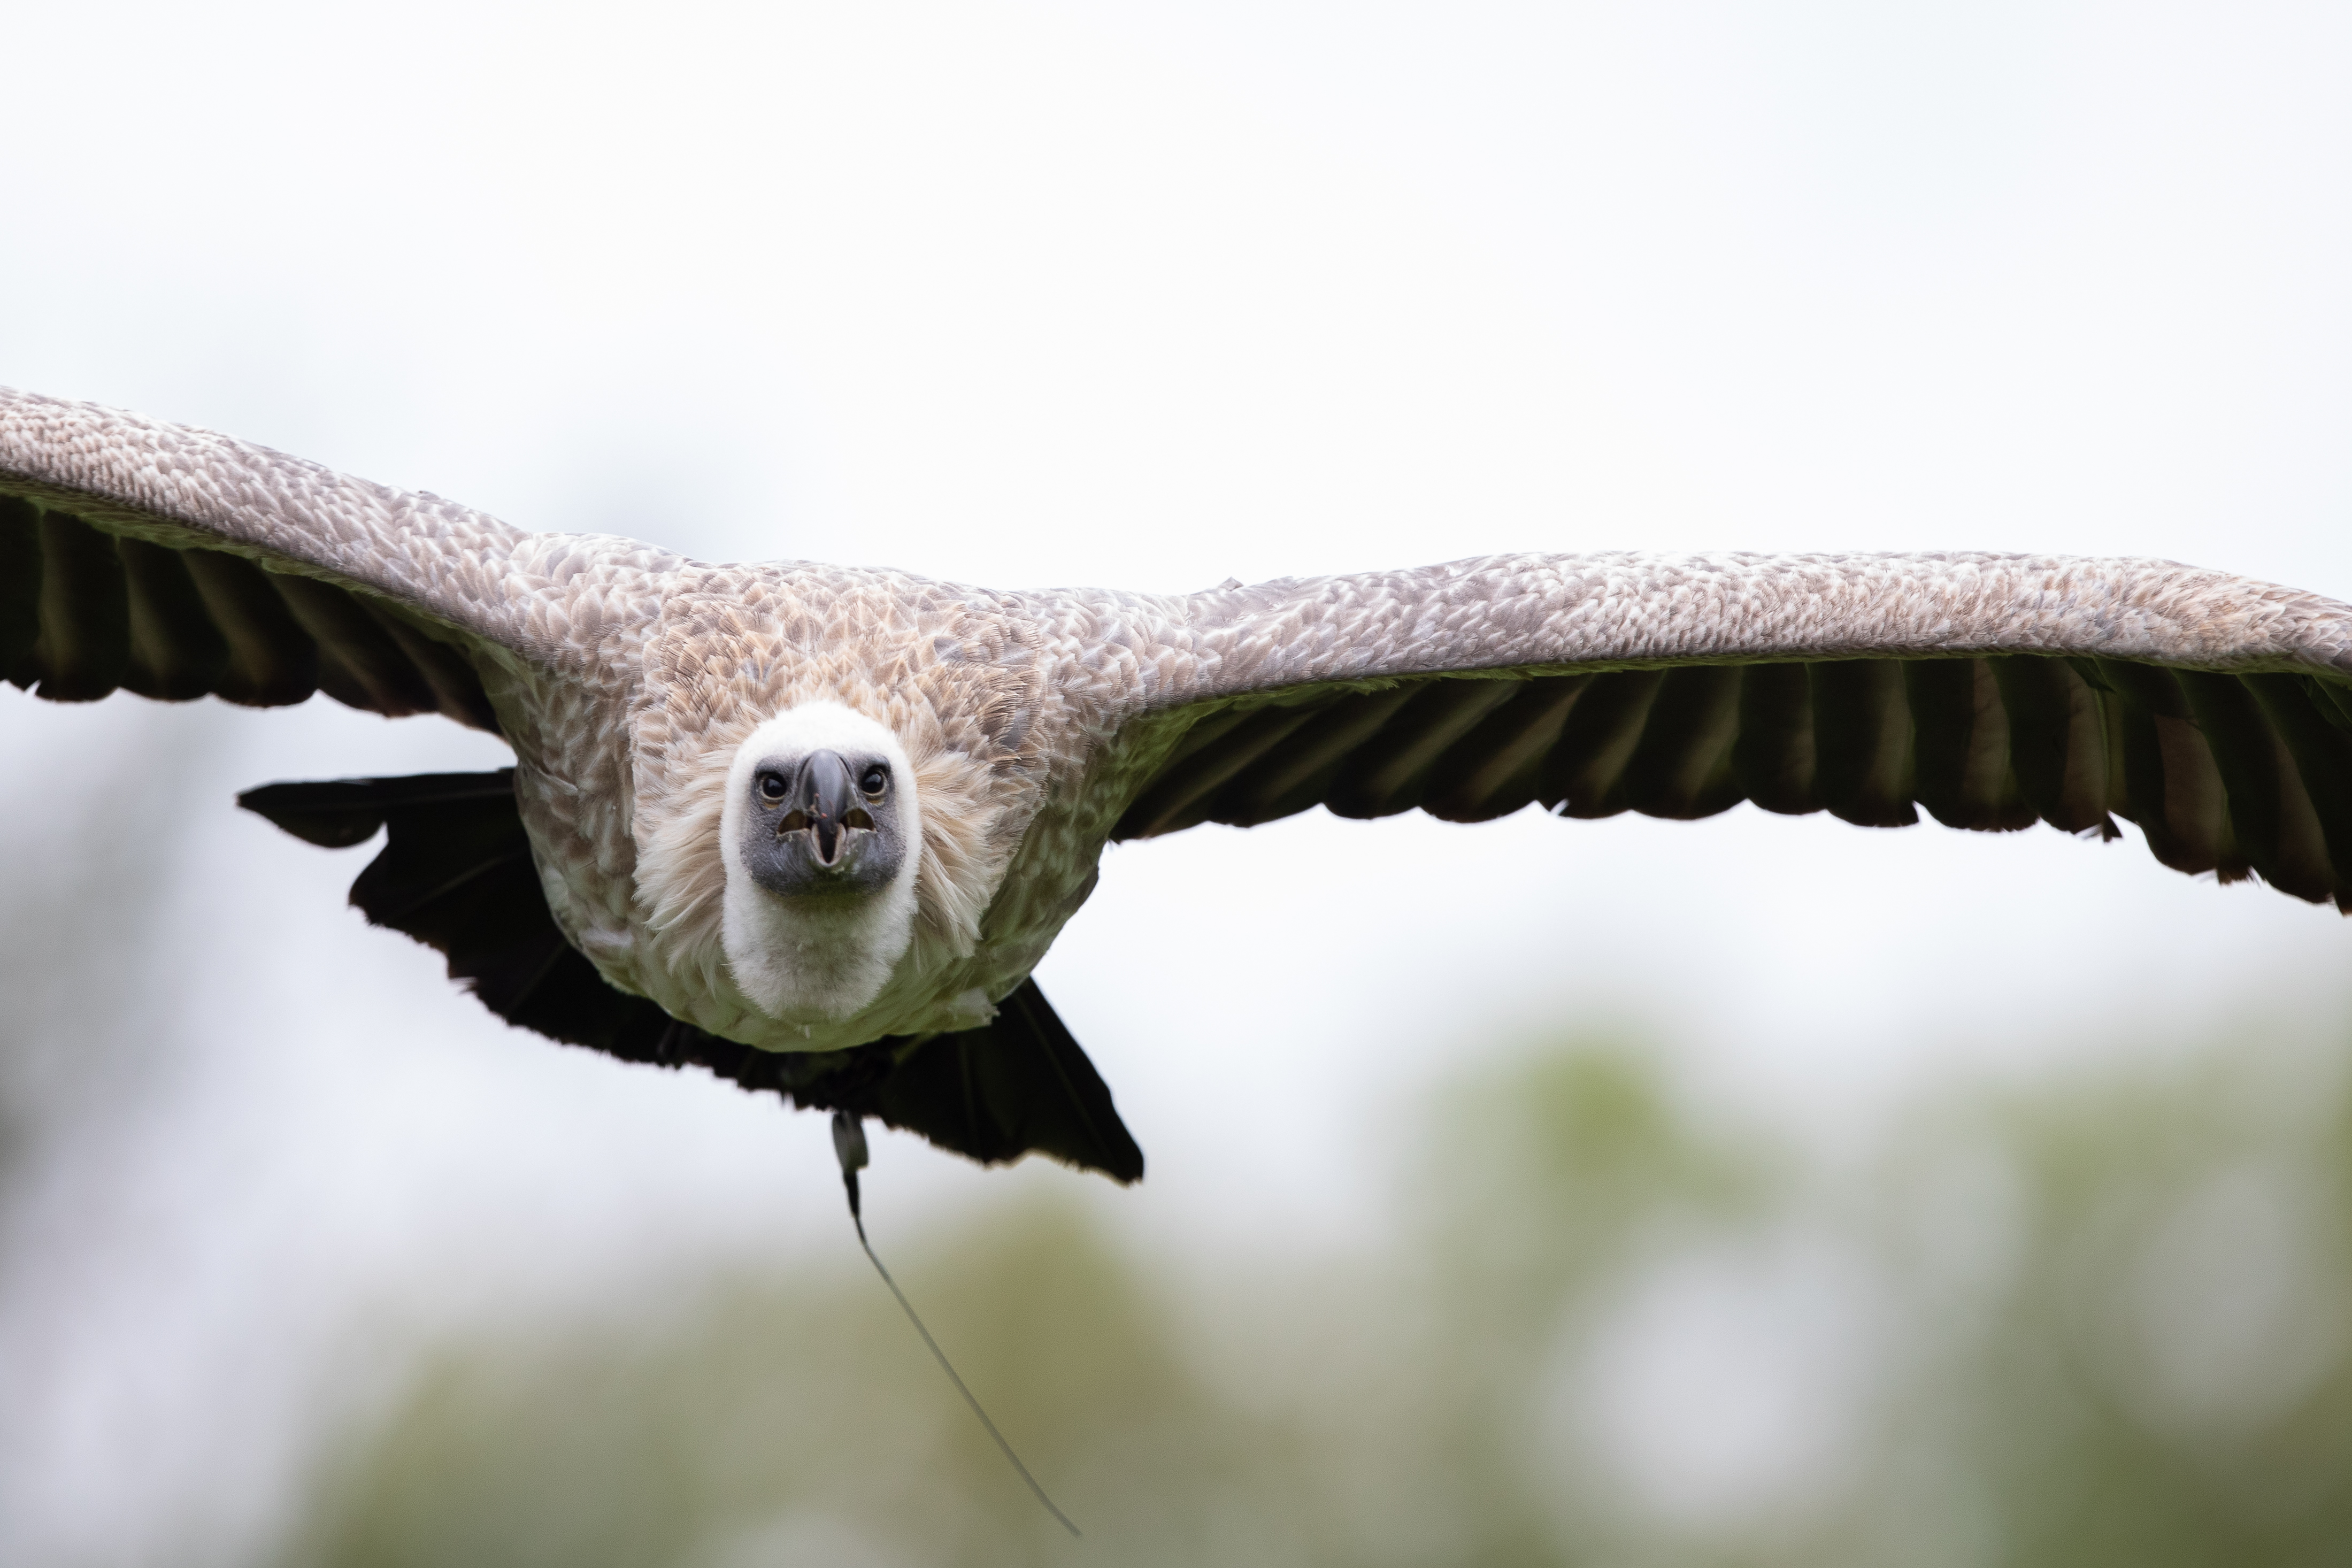 A front on view of a Griffon Vulture mid flight